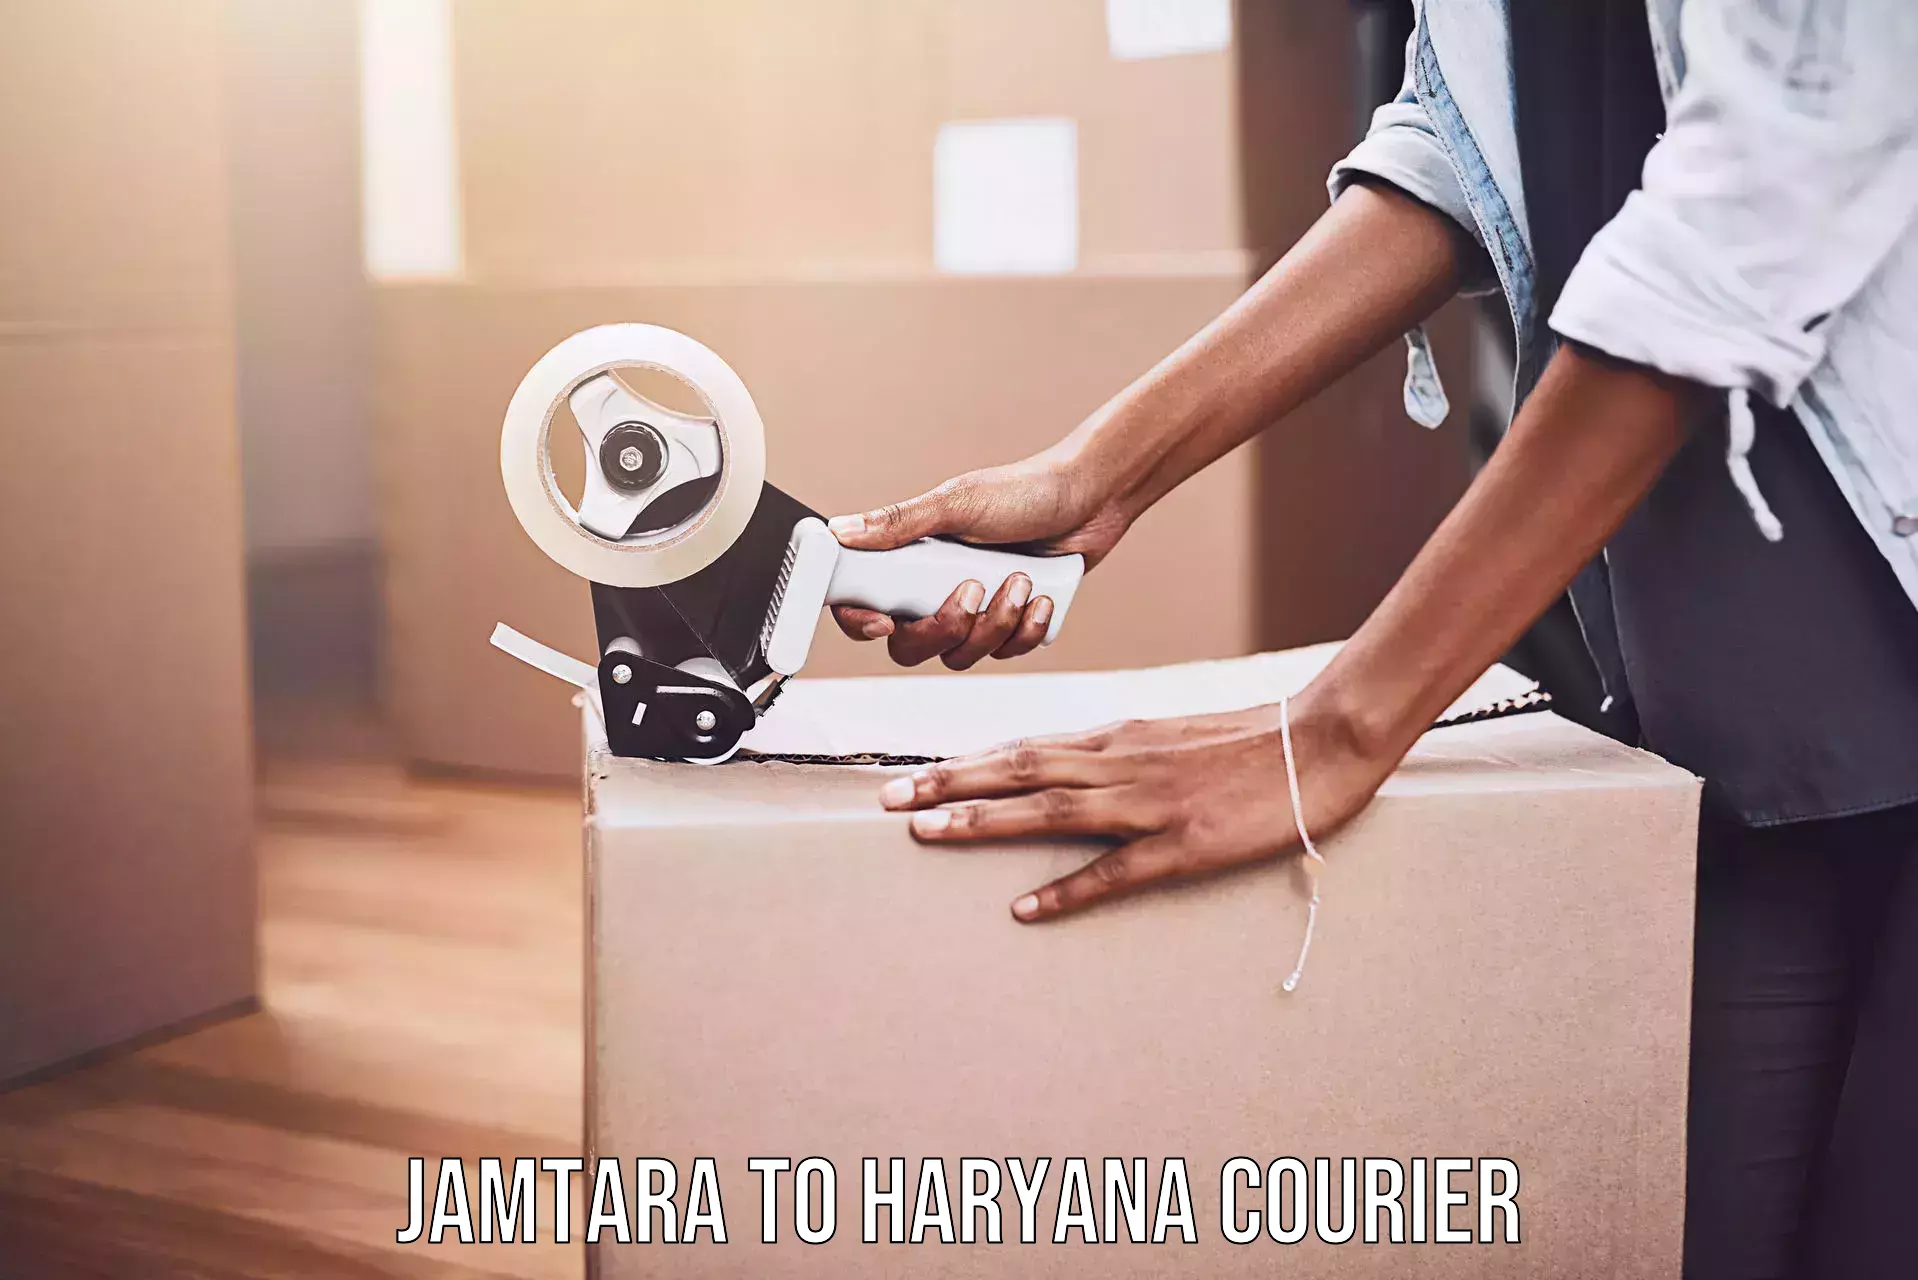 State-of-the-art courier technology Jamtara to Gurgaon